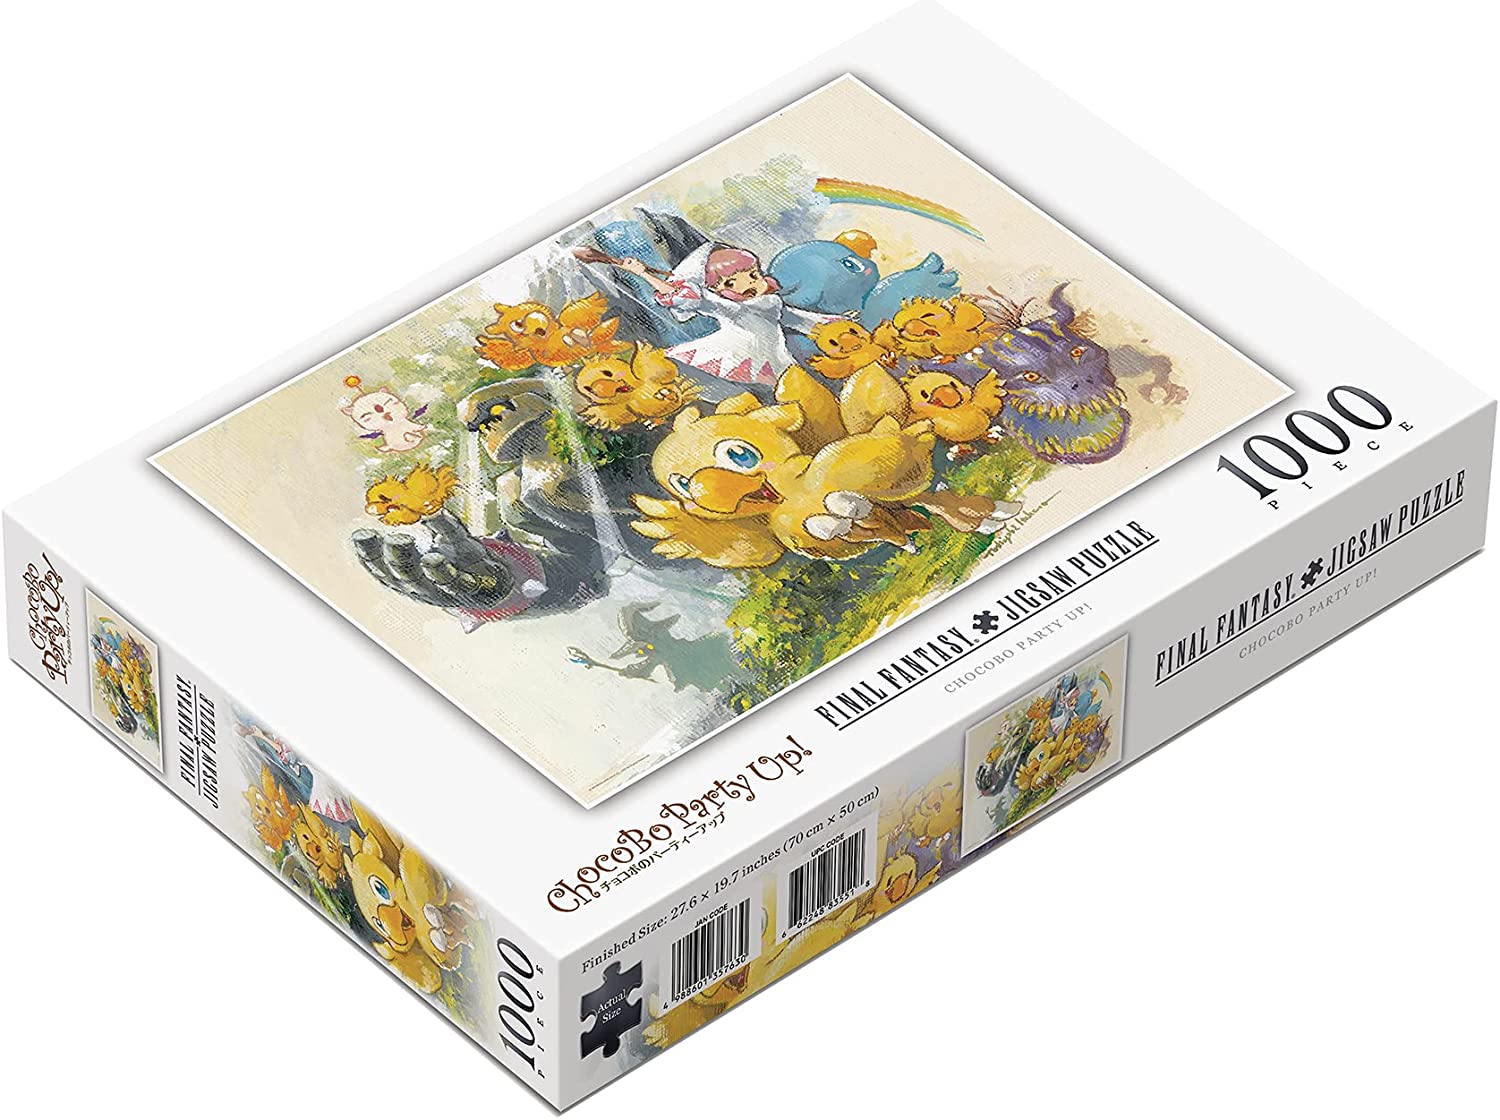 Final Fantasy Jigsaw Puzzle - Chocobo Party Up! 1000 PIECES, Square AEnix